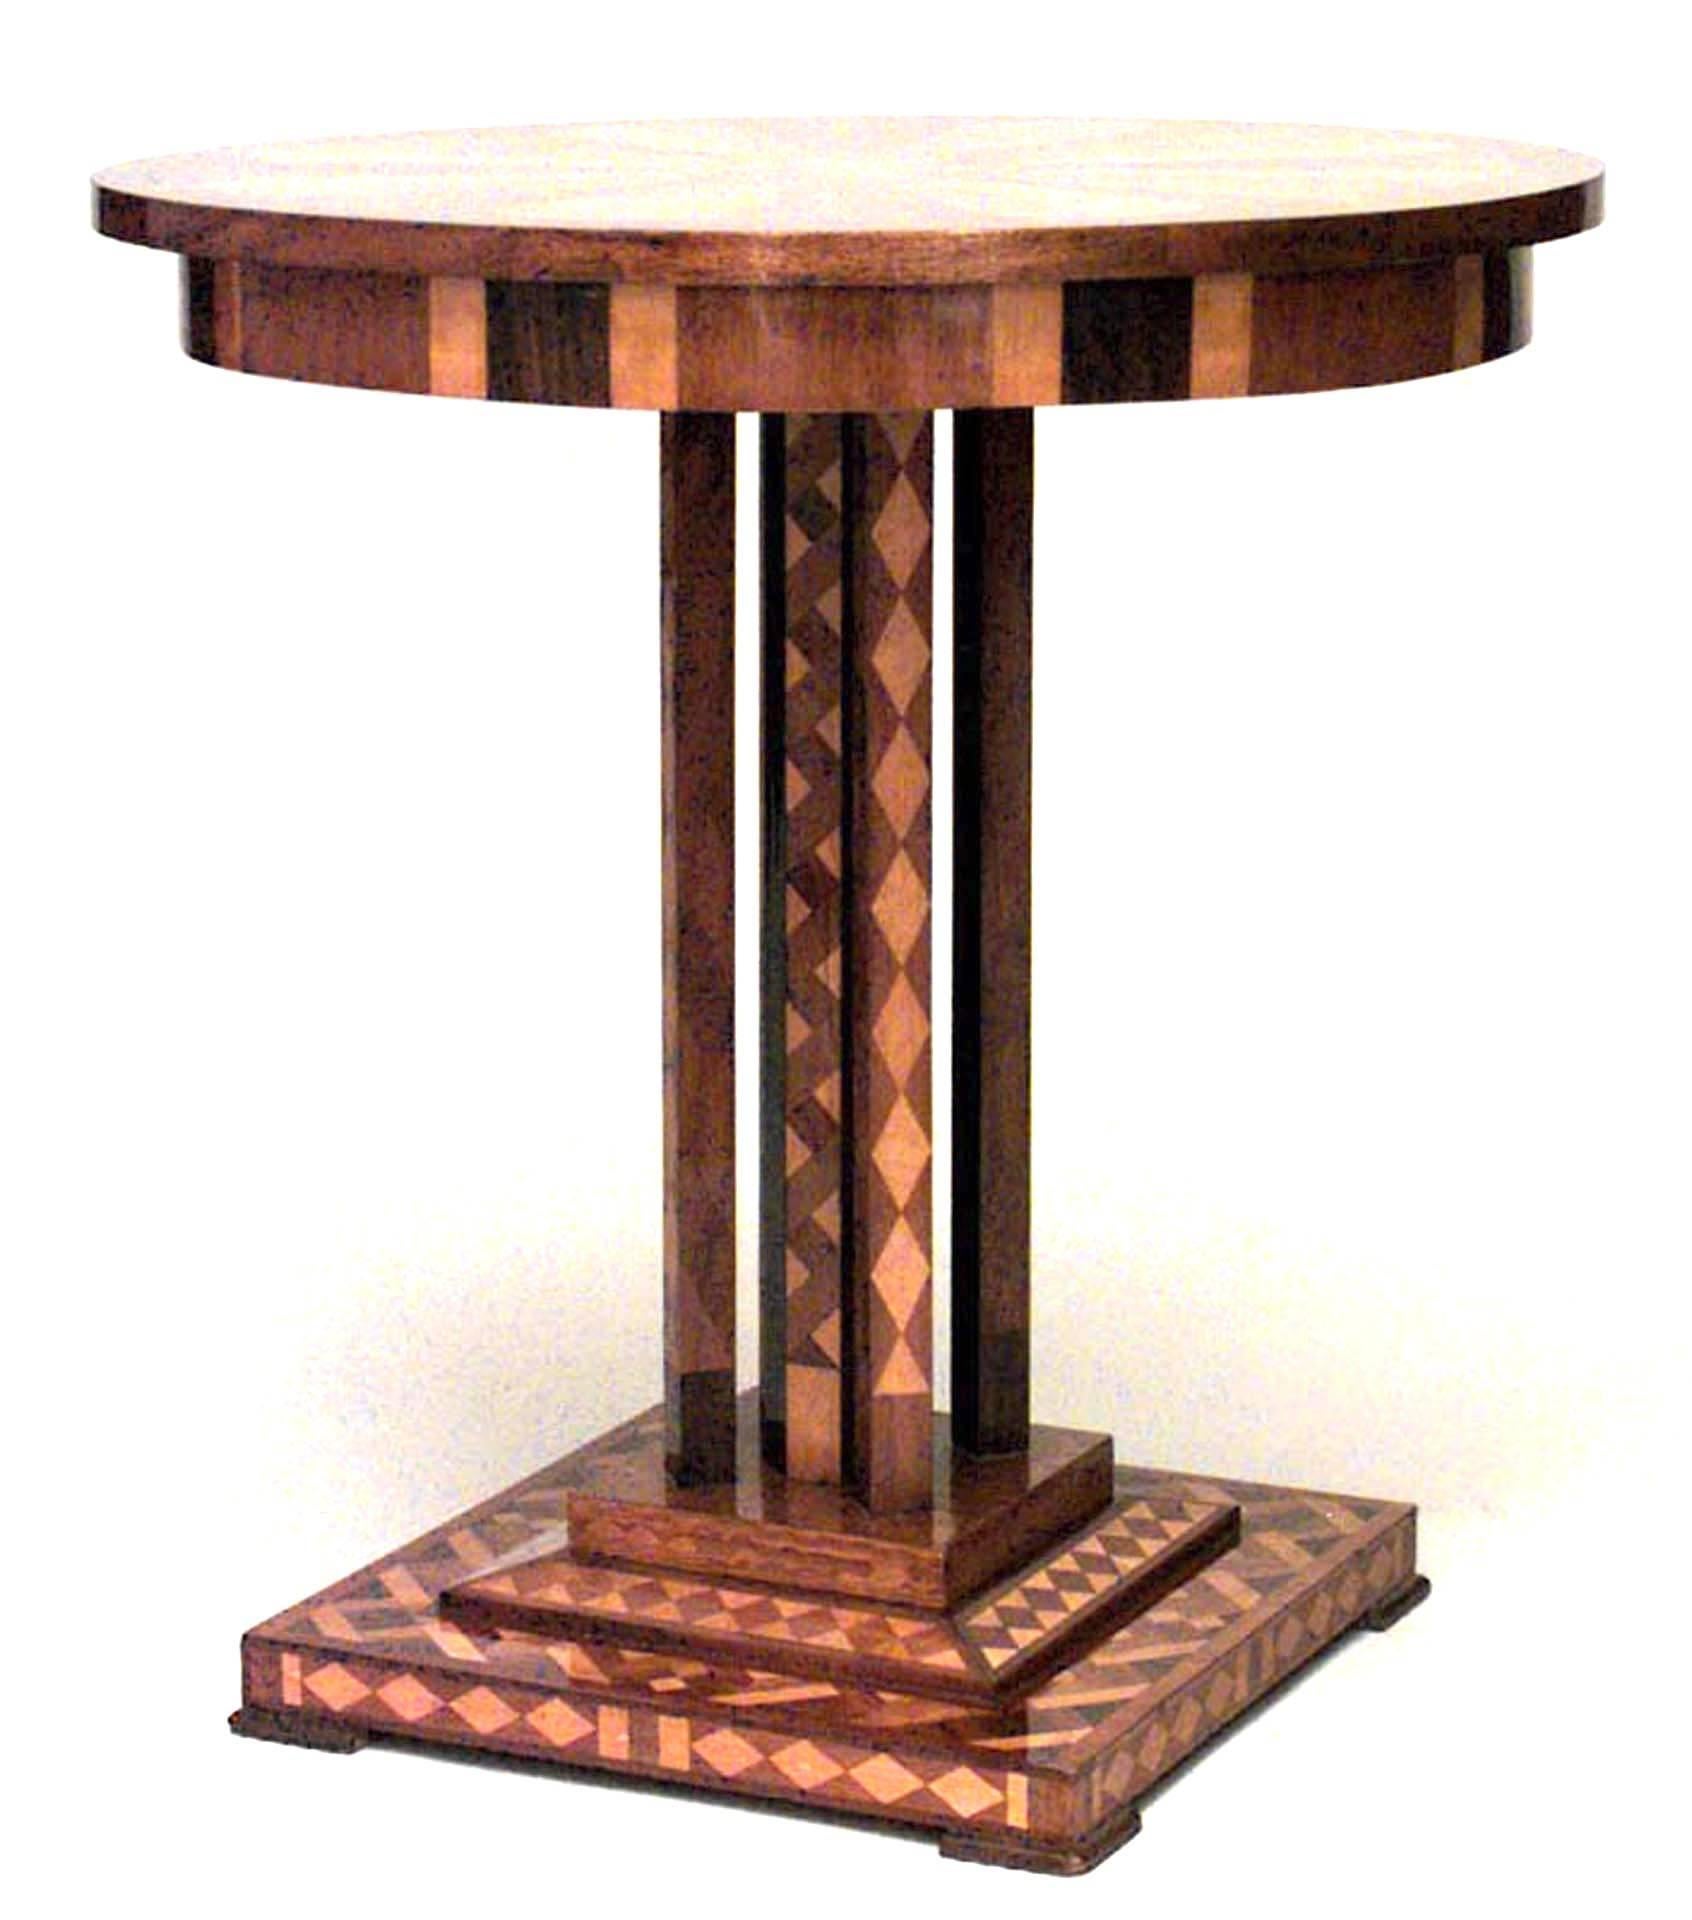 Nineteenth century Austrian Biedermeier geometric inlaid mahogany end table with a round top supported by four square columns and an octagonal post pedestal above a square base.